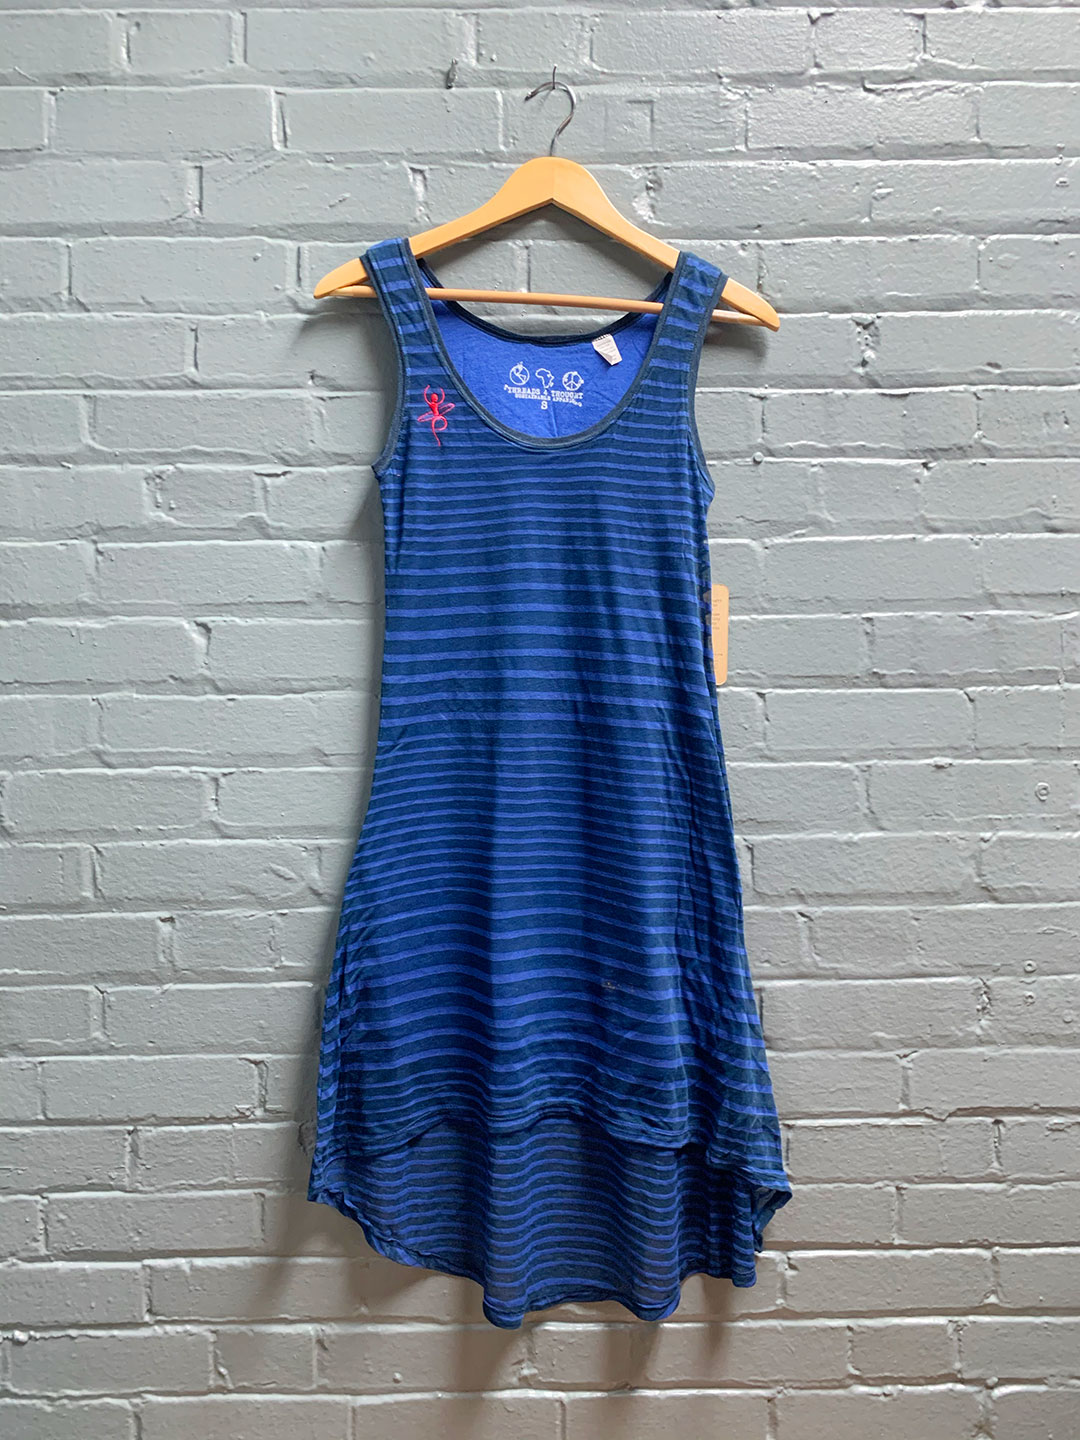 The String Cheese Incident - Official Merch Shop - Women's Sundress in Blue Hanging